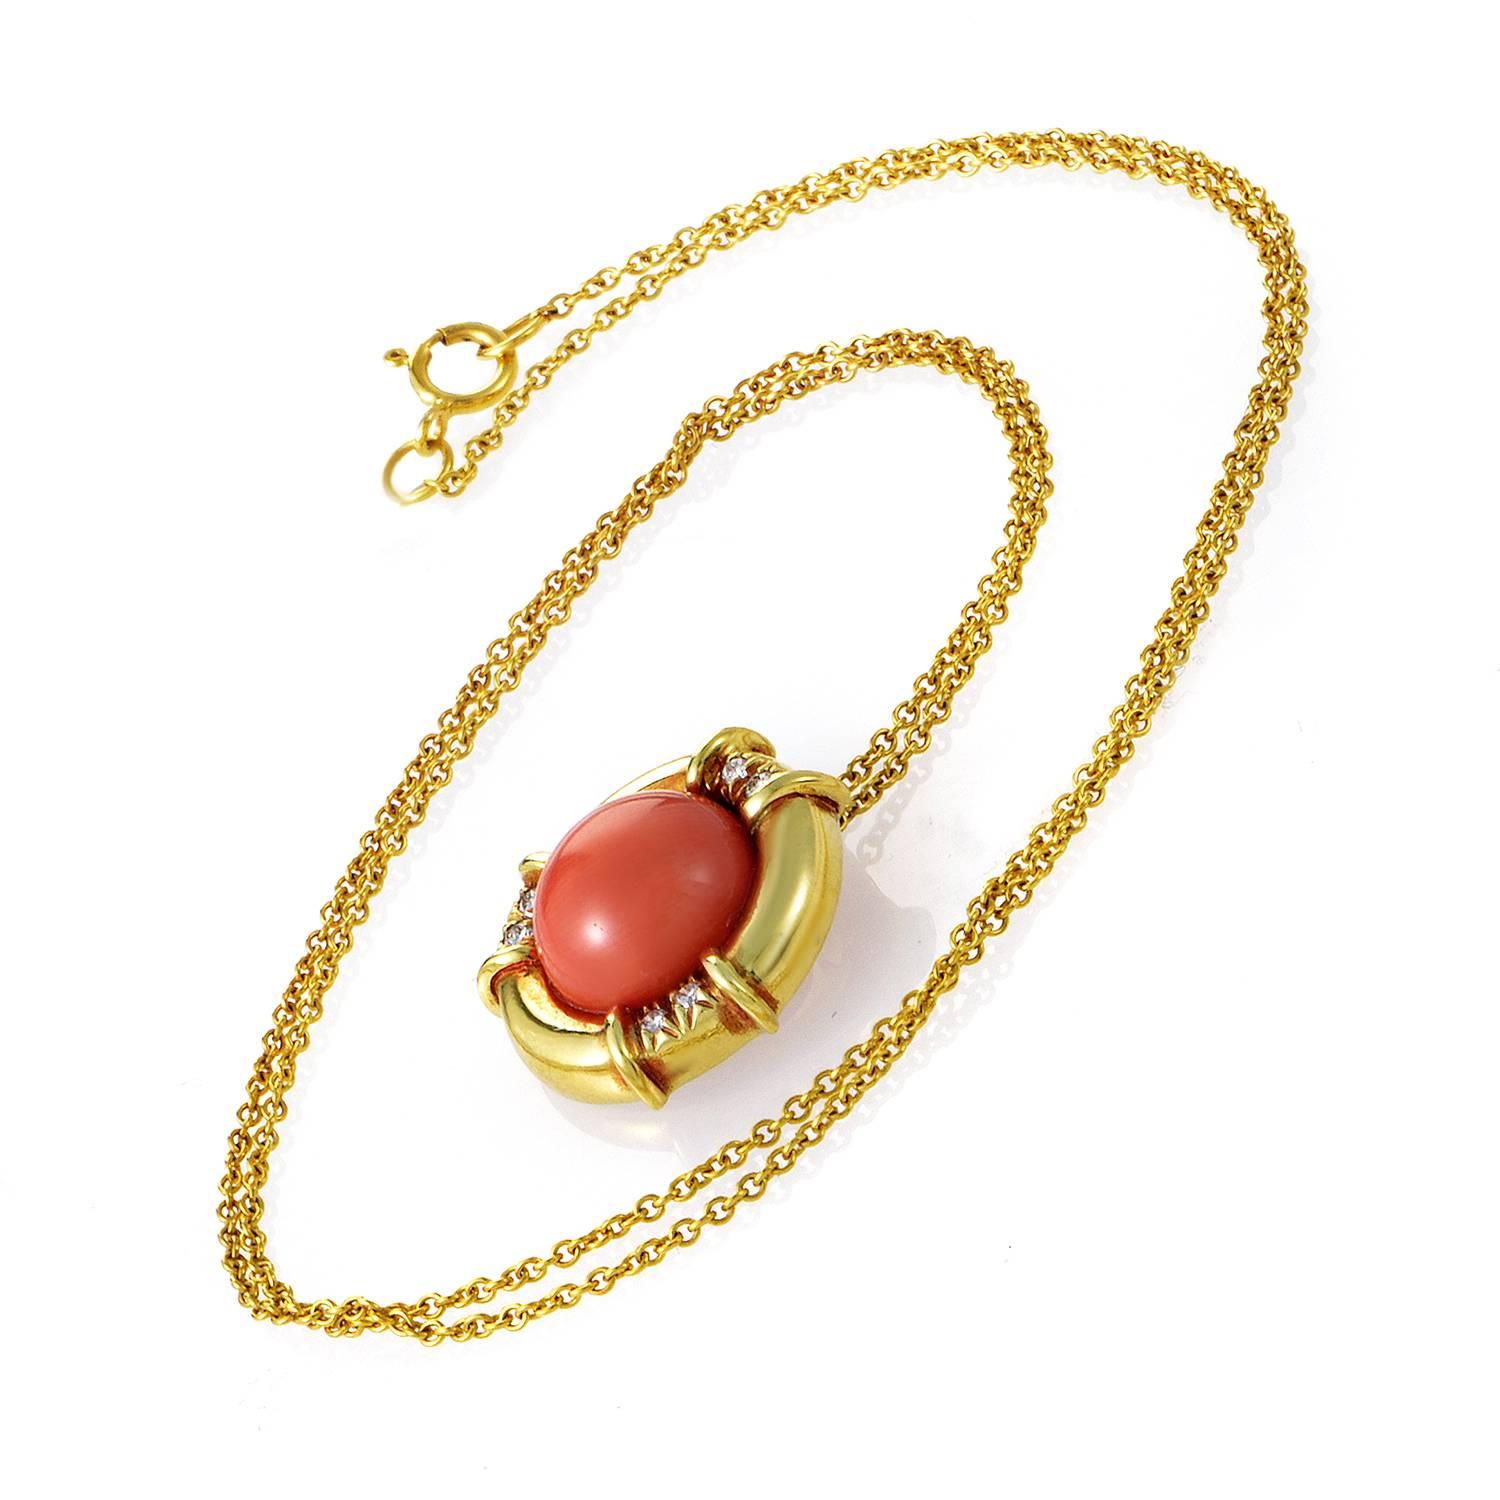 Tiffany creates a swell of style in this eye-catching pendant necklace. 18K Gold drops in a fine chain before gathering into a smooth frame for a burst of coral. Adding to the perimeter's luxurious charm are the three pairs of 0.10 diamonds set